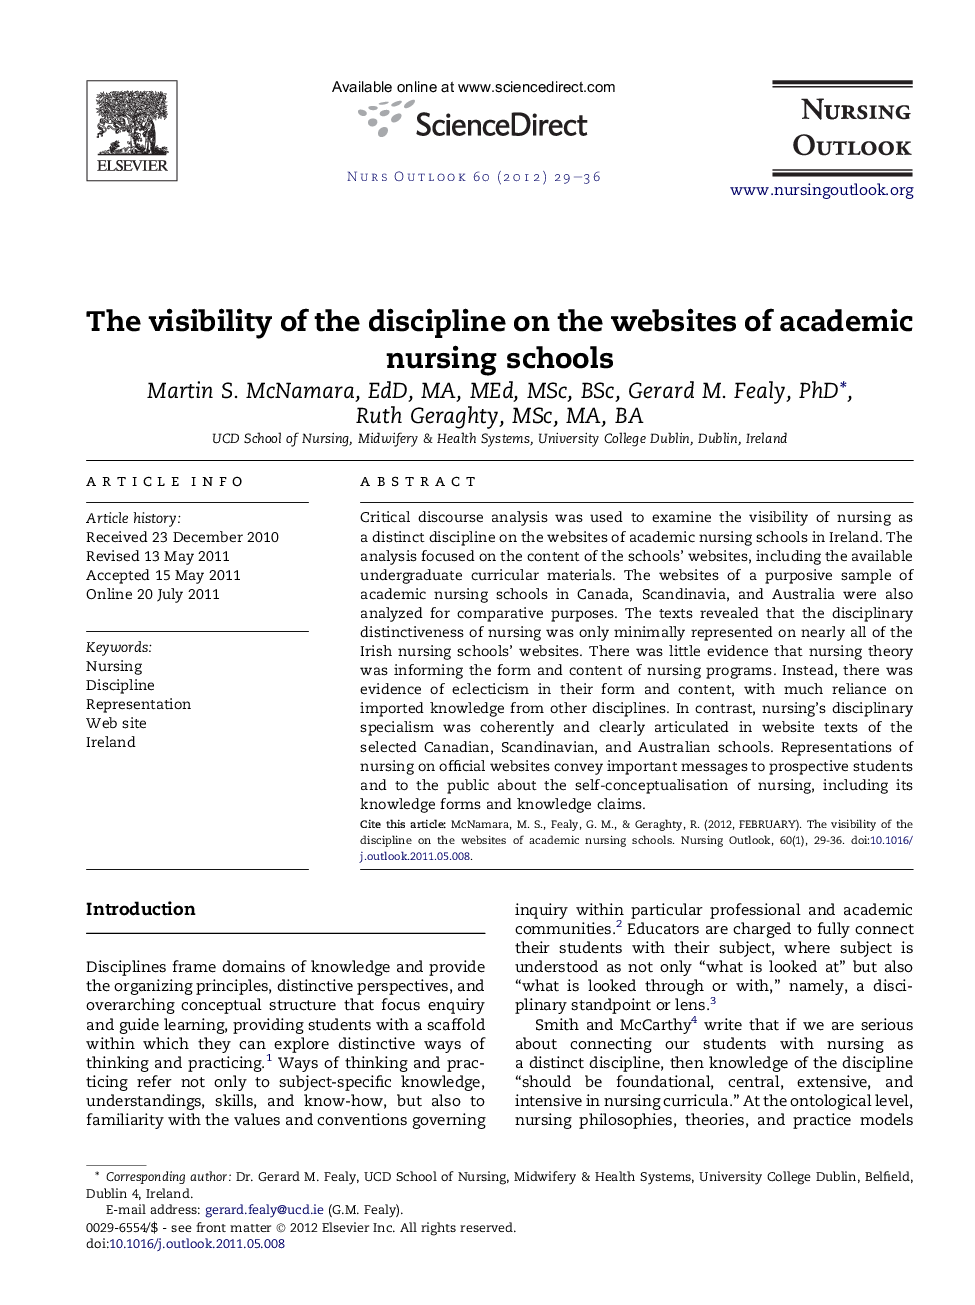 The visibility of the discipline on the websites of academic nursing schools